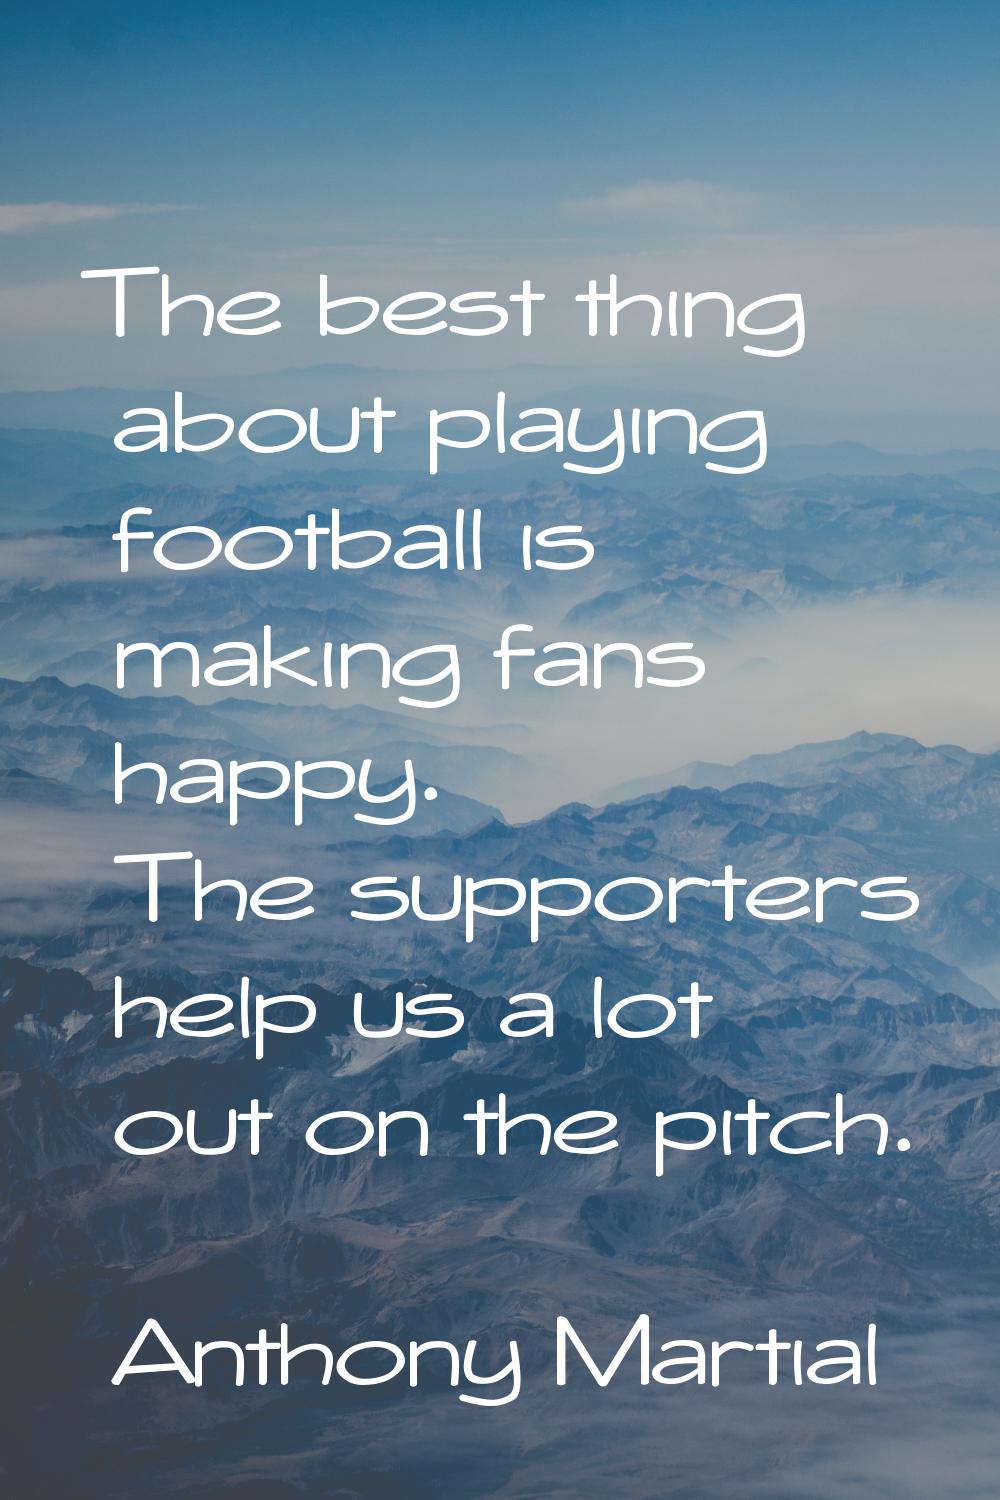 The best thing about playing football is making fans happy. The supporters help us a lot out on the